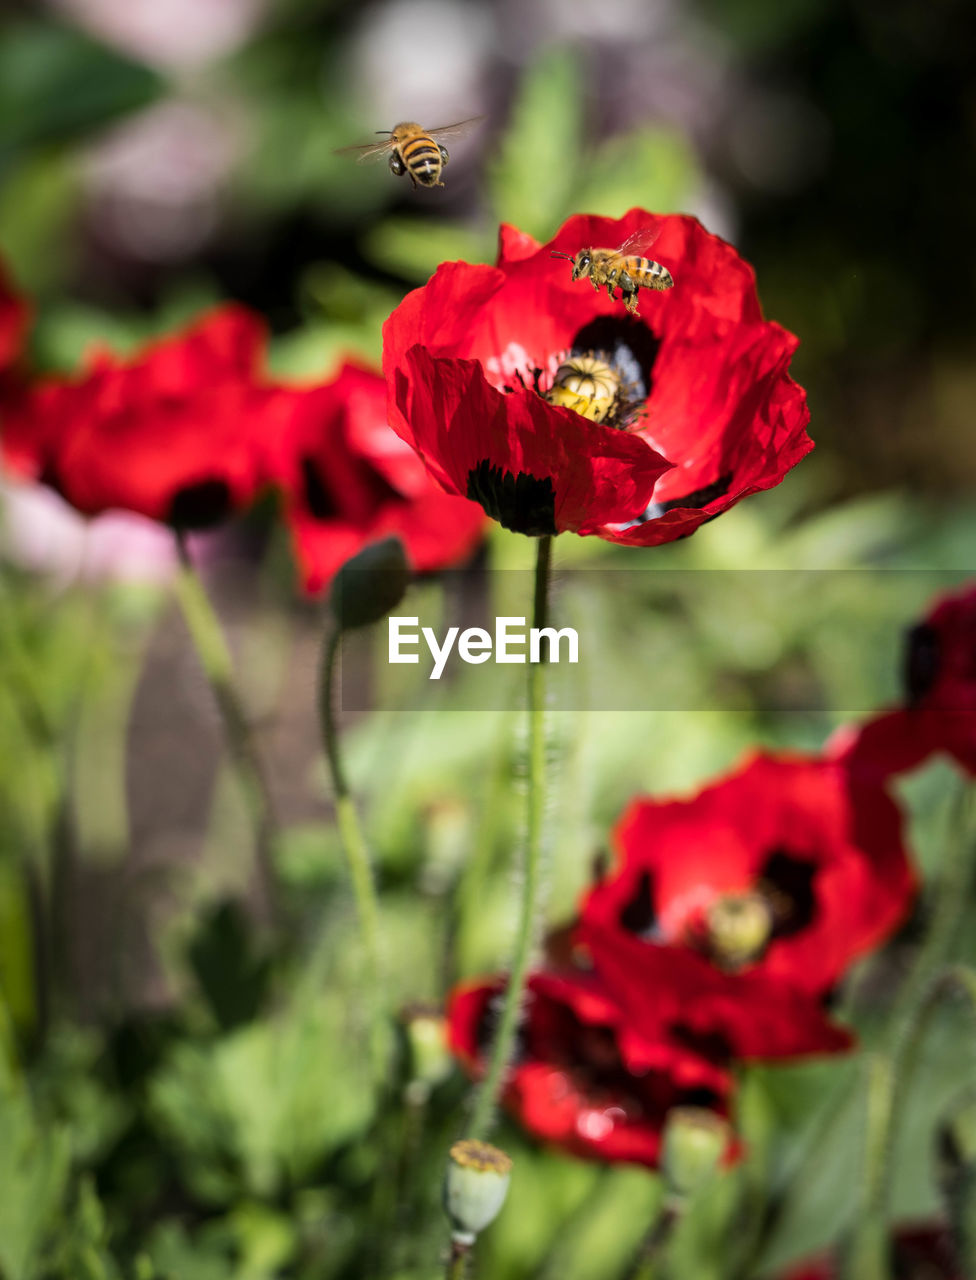 CLOSE-UP OF RED POPPY BLOOMING ON PLANT